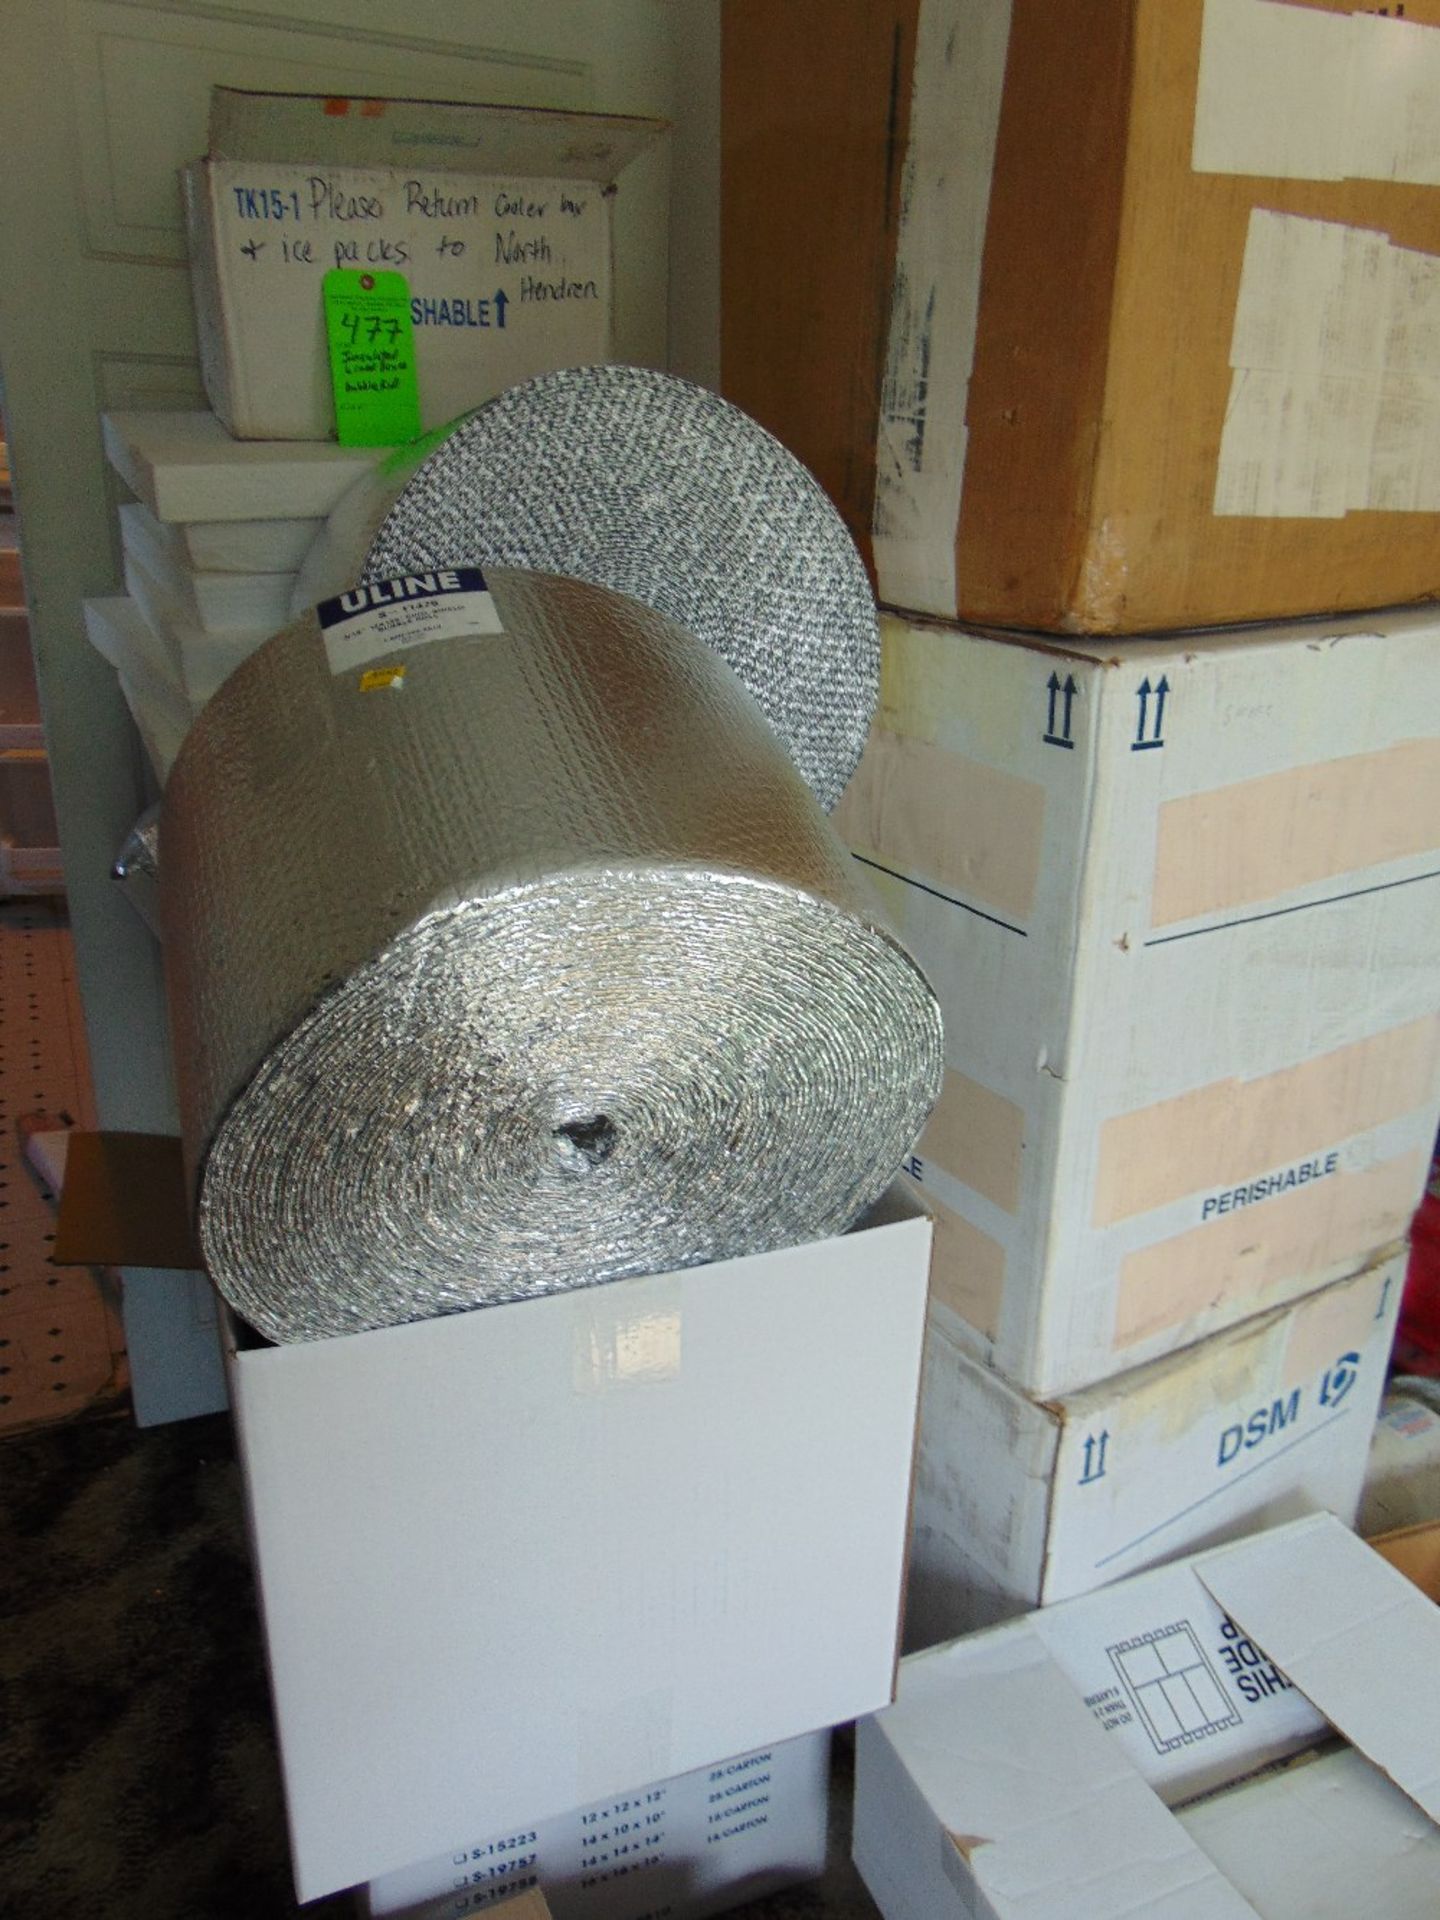 Lot of Insulated Shipping Materials, Includes 3 New Rolls of U-Line "Cool Shield" Bubble Wrap and